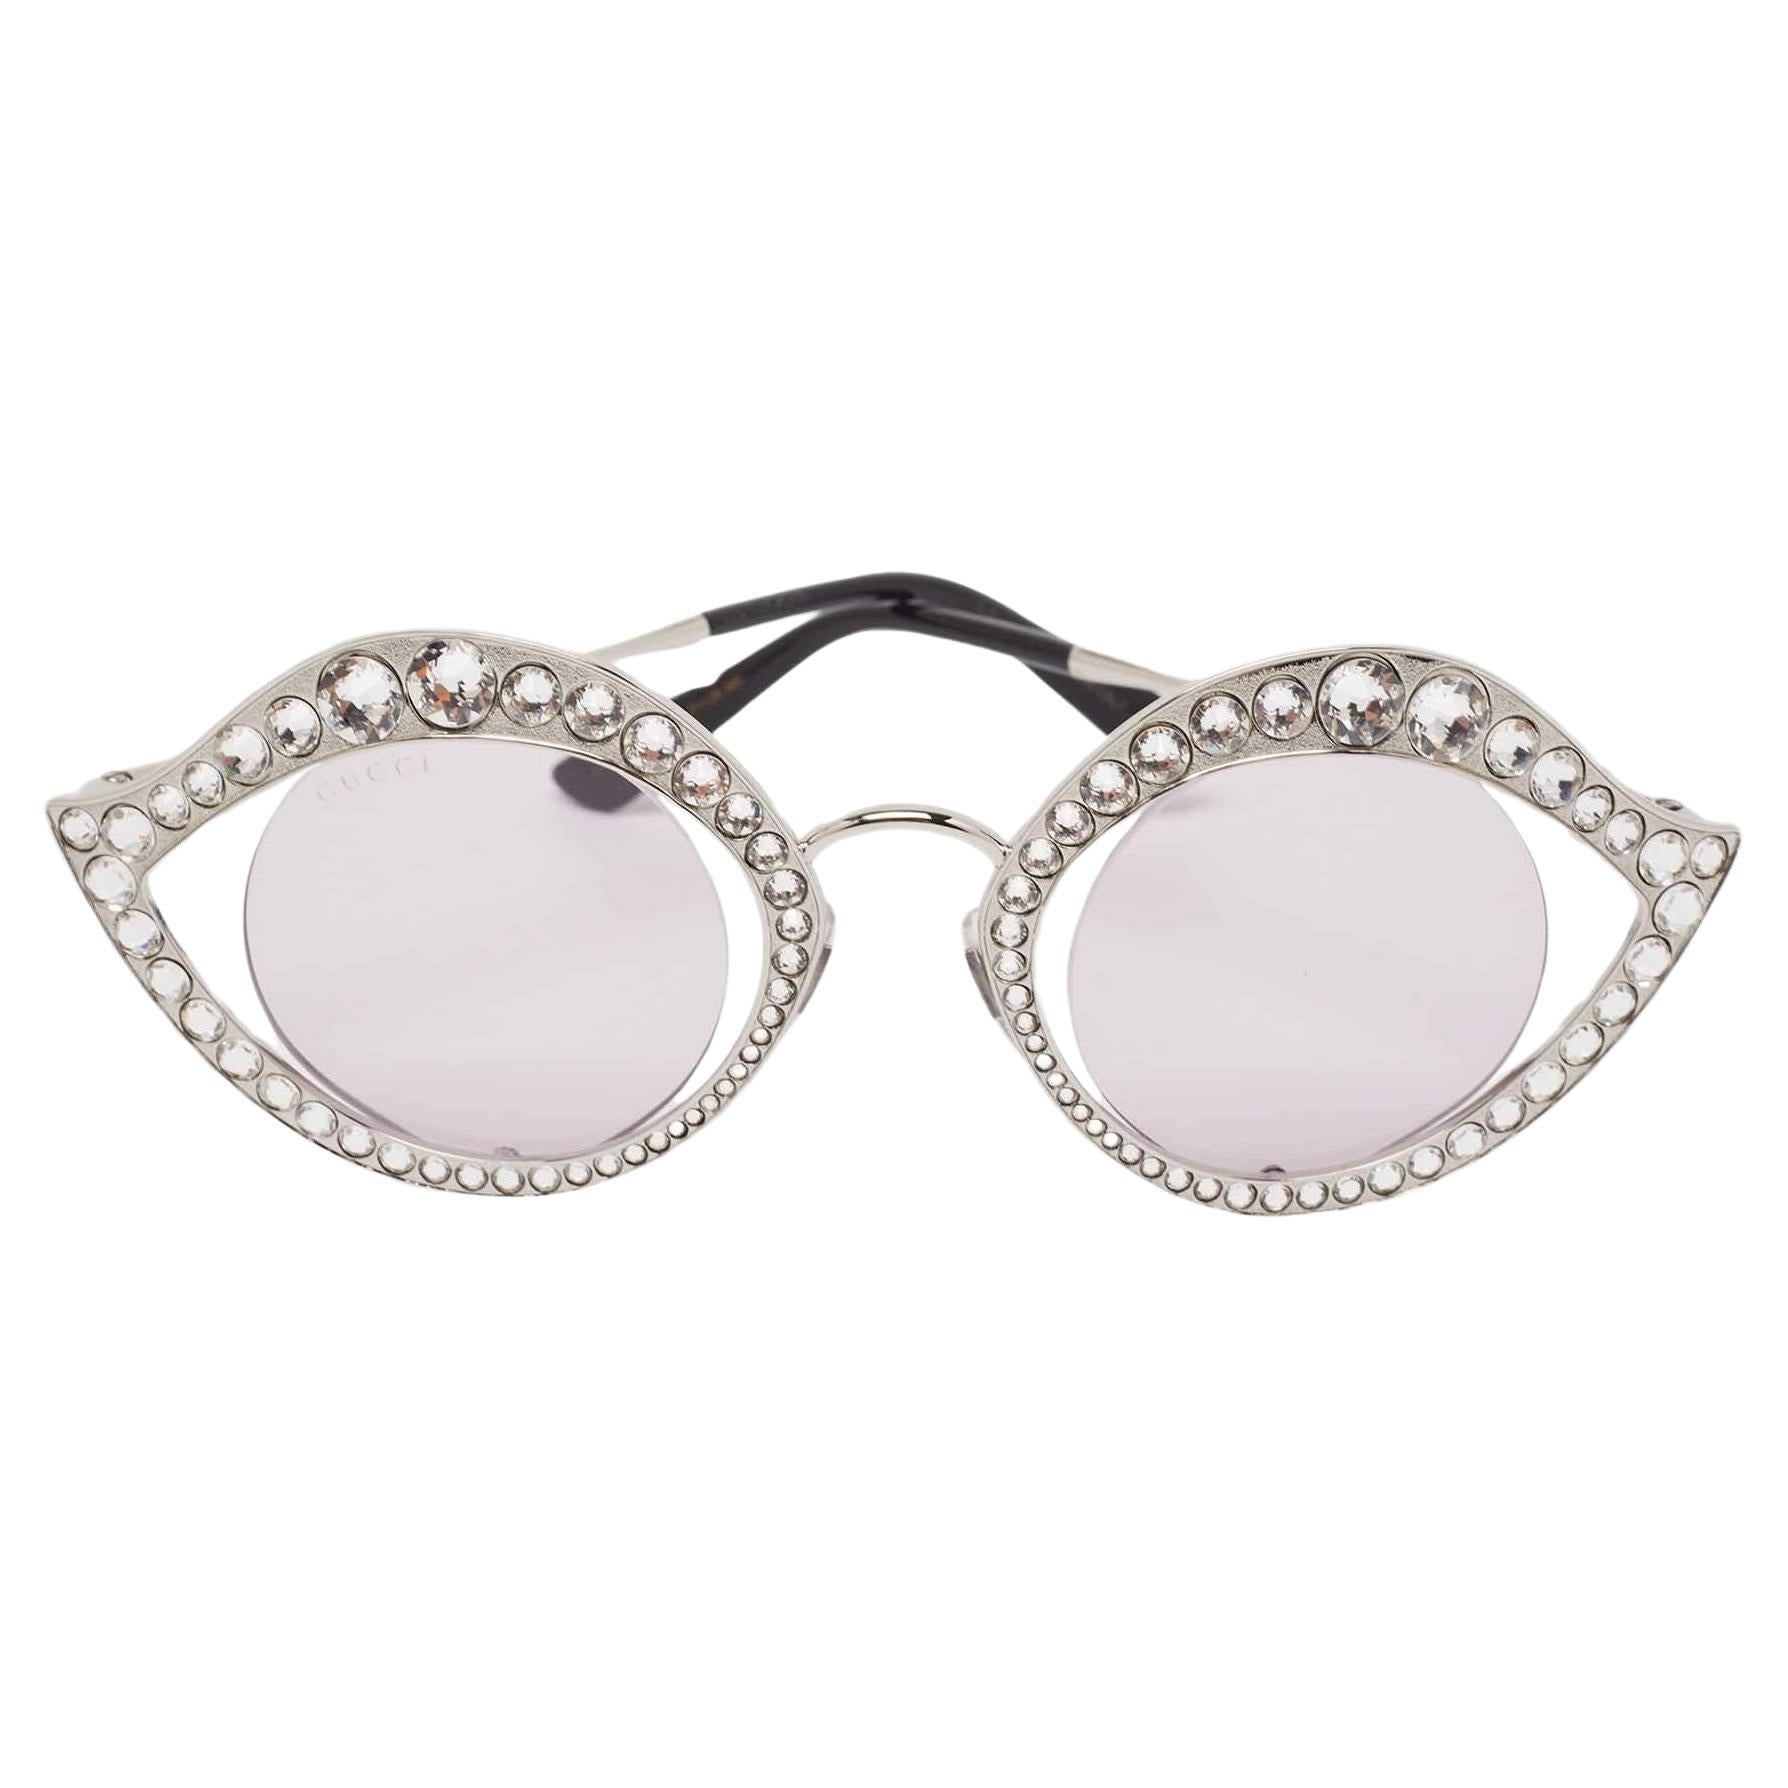 Gucci Lilac/Silver GG0046S Crystals Eye Round Sunglasses